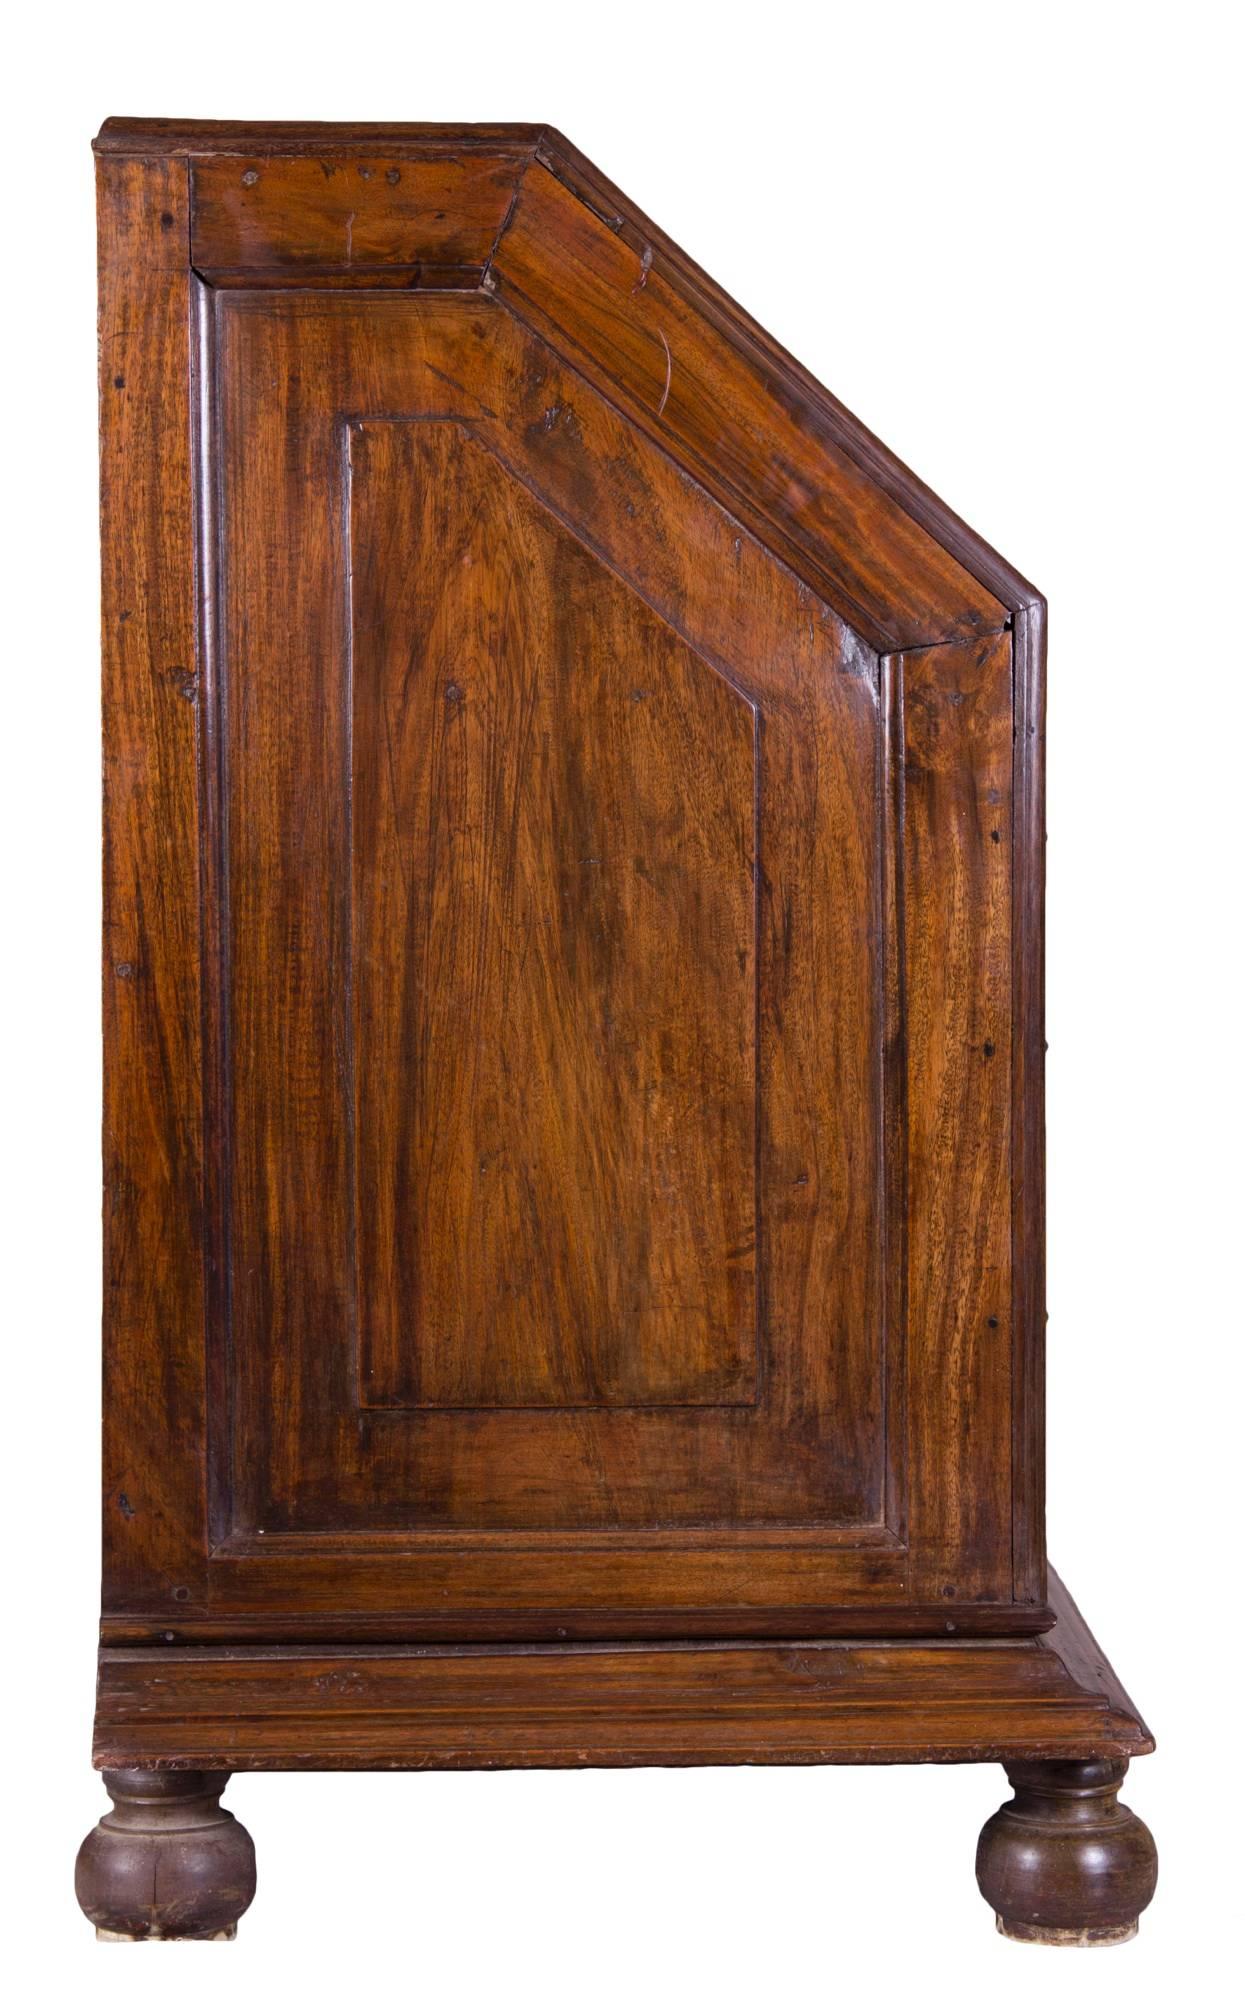 Important Paneled Block-Front Paduk Wood Fall-Front Desk, China For Sale 2